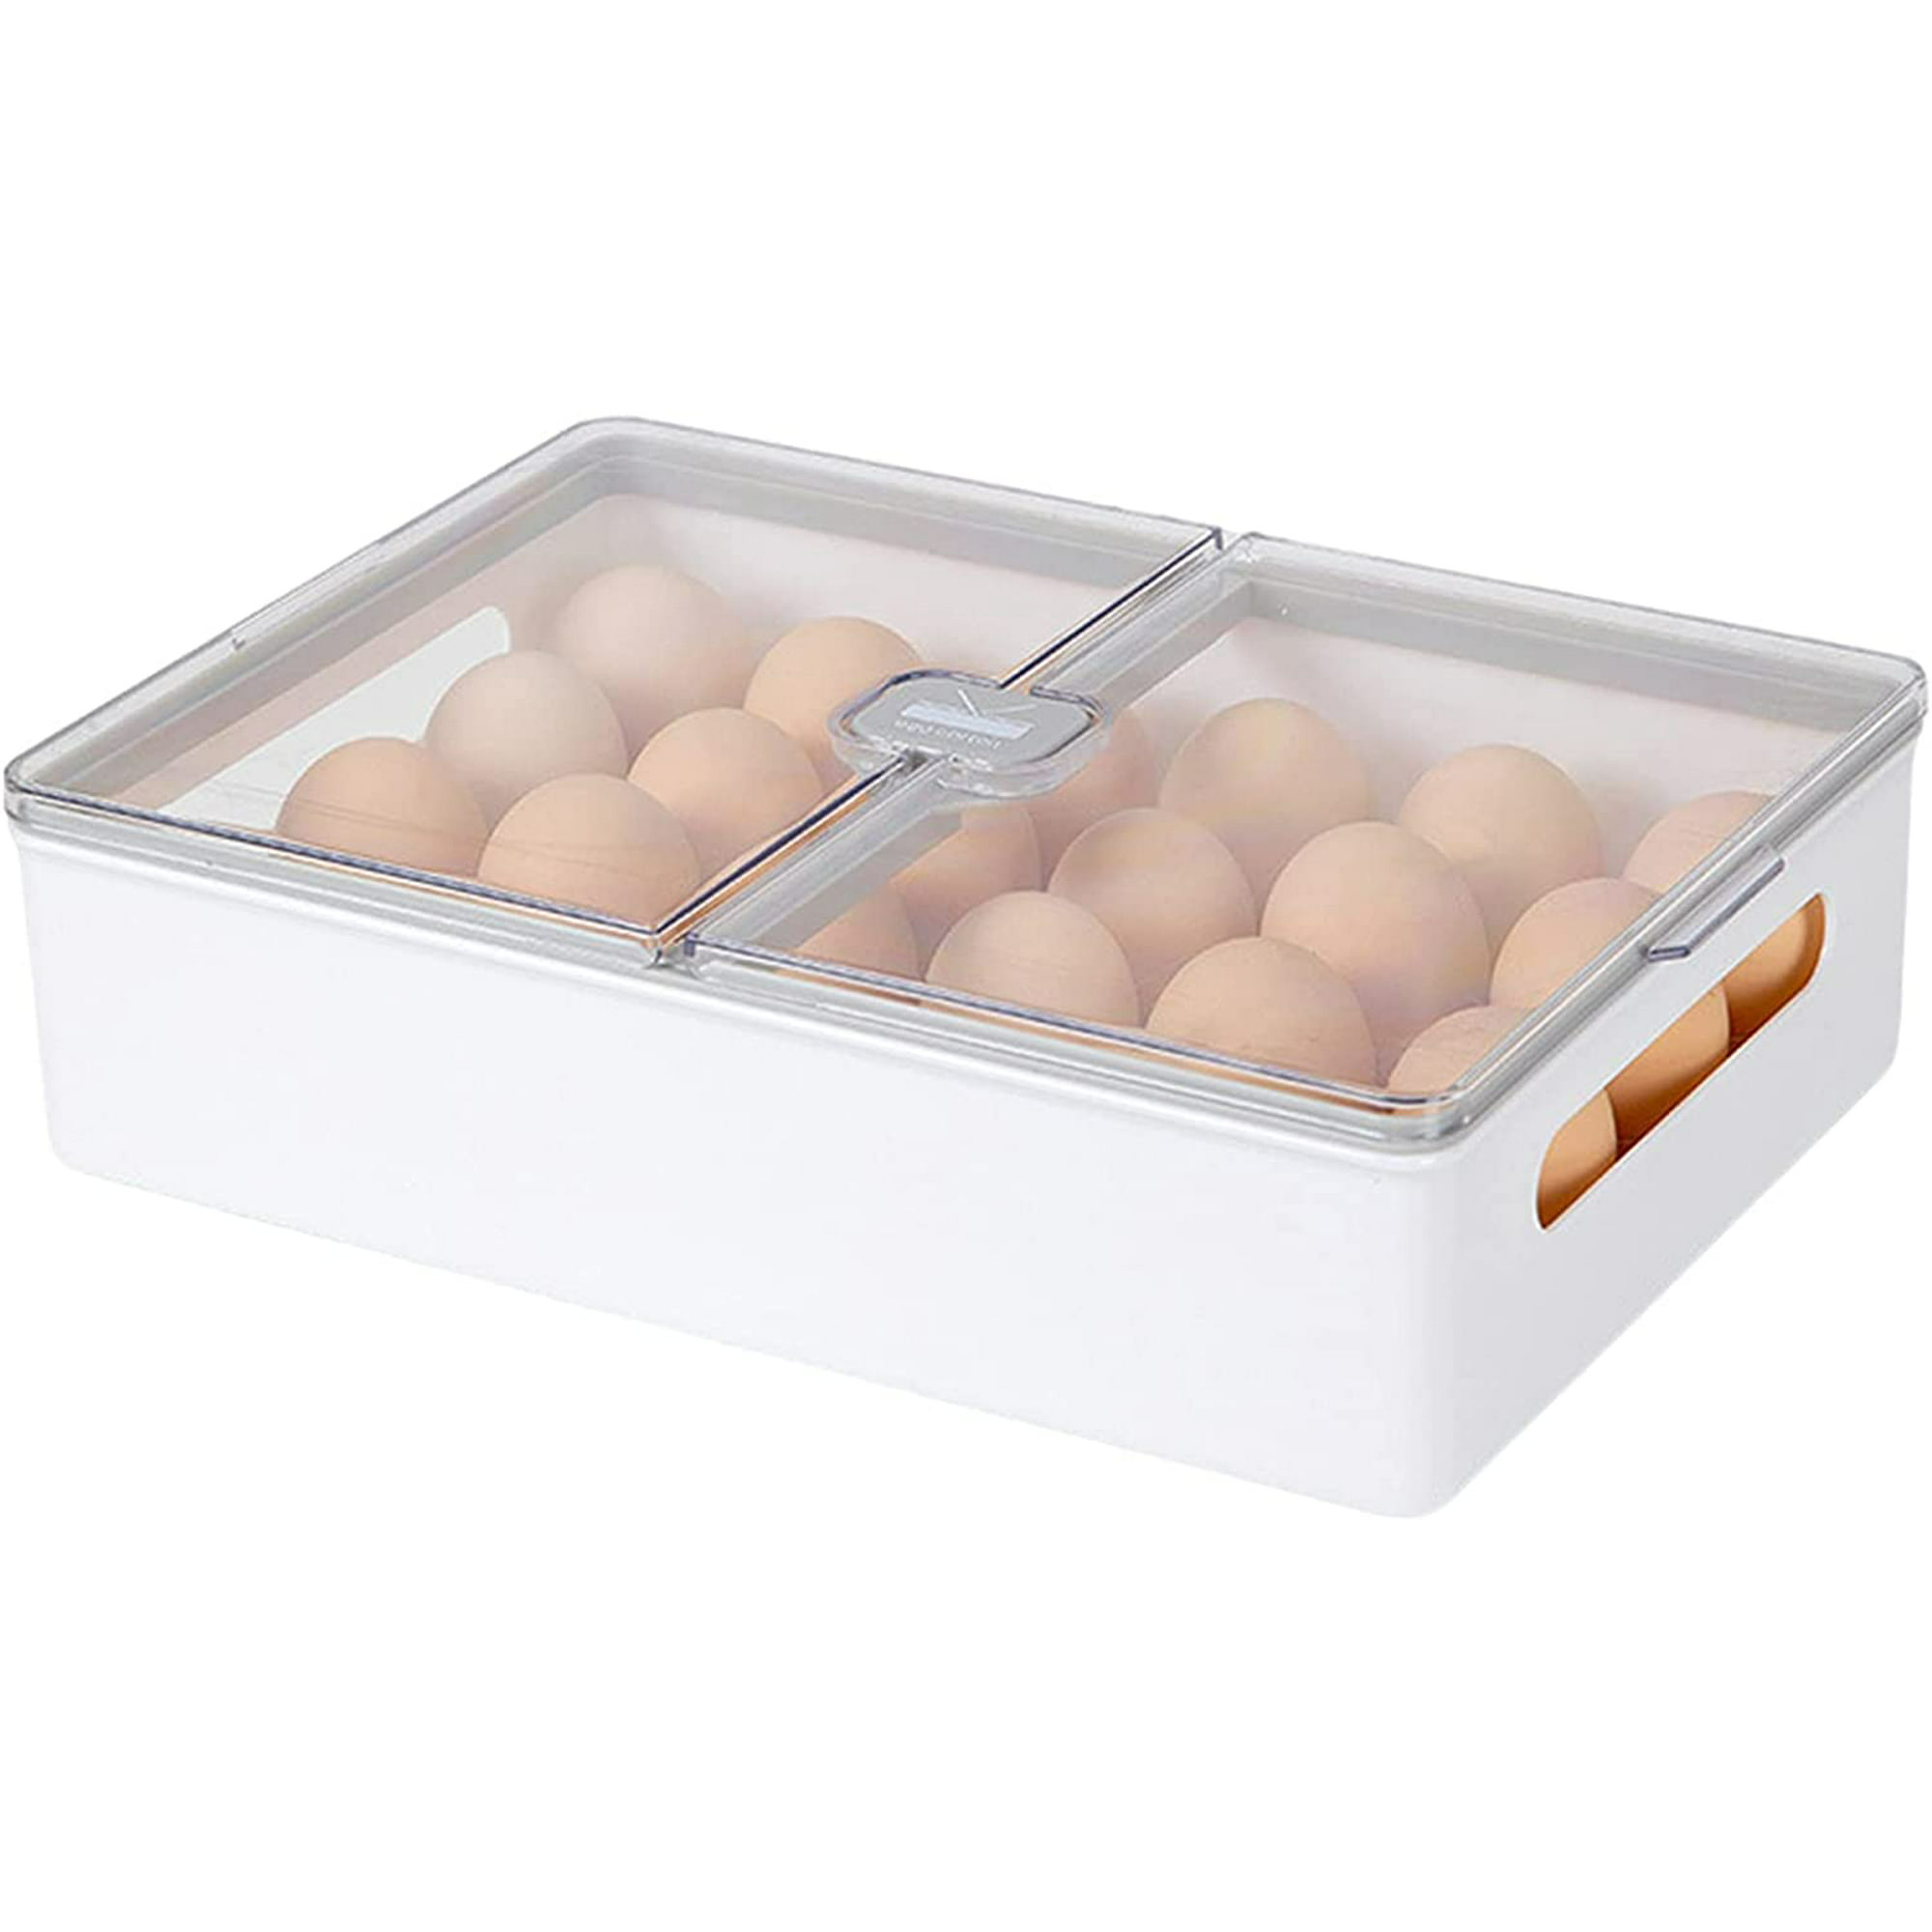 24 Grid Refrigerator Egg Holder Storage Egg Tray with Lid Container Organizer